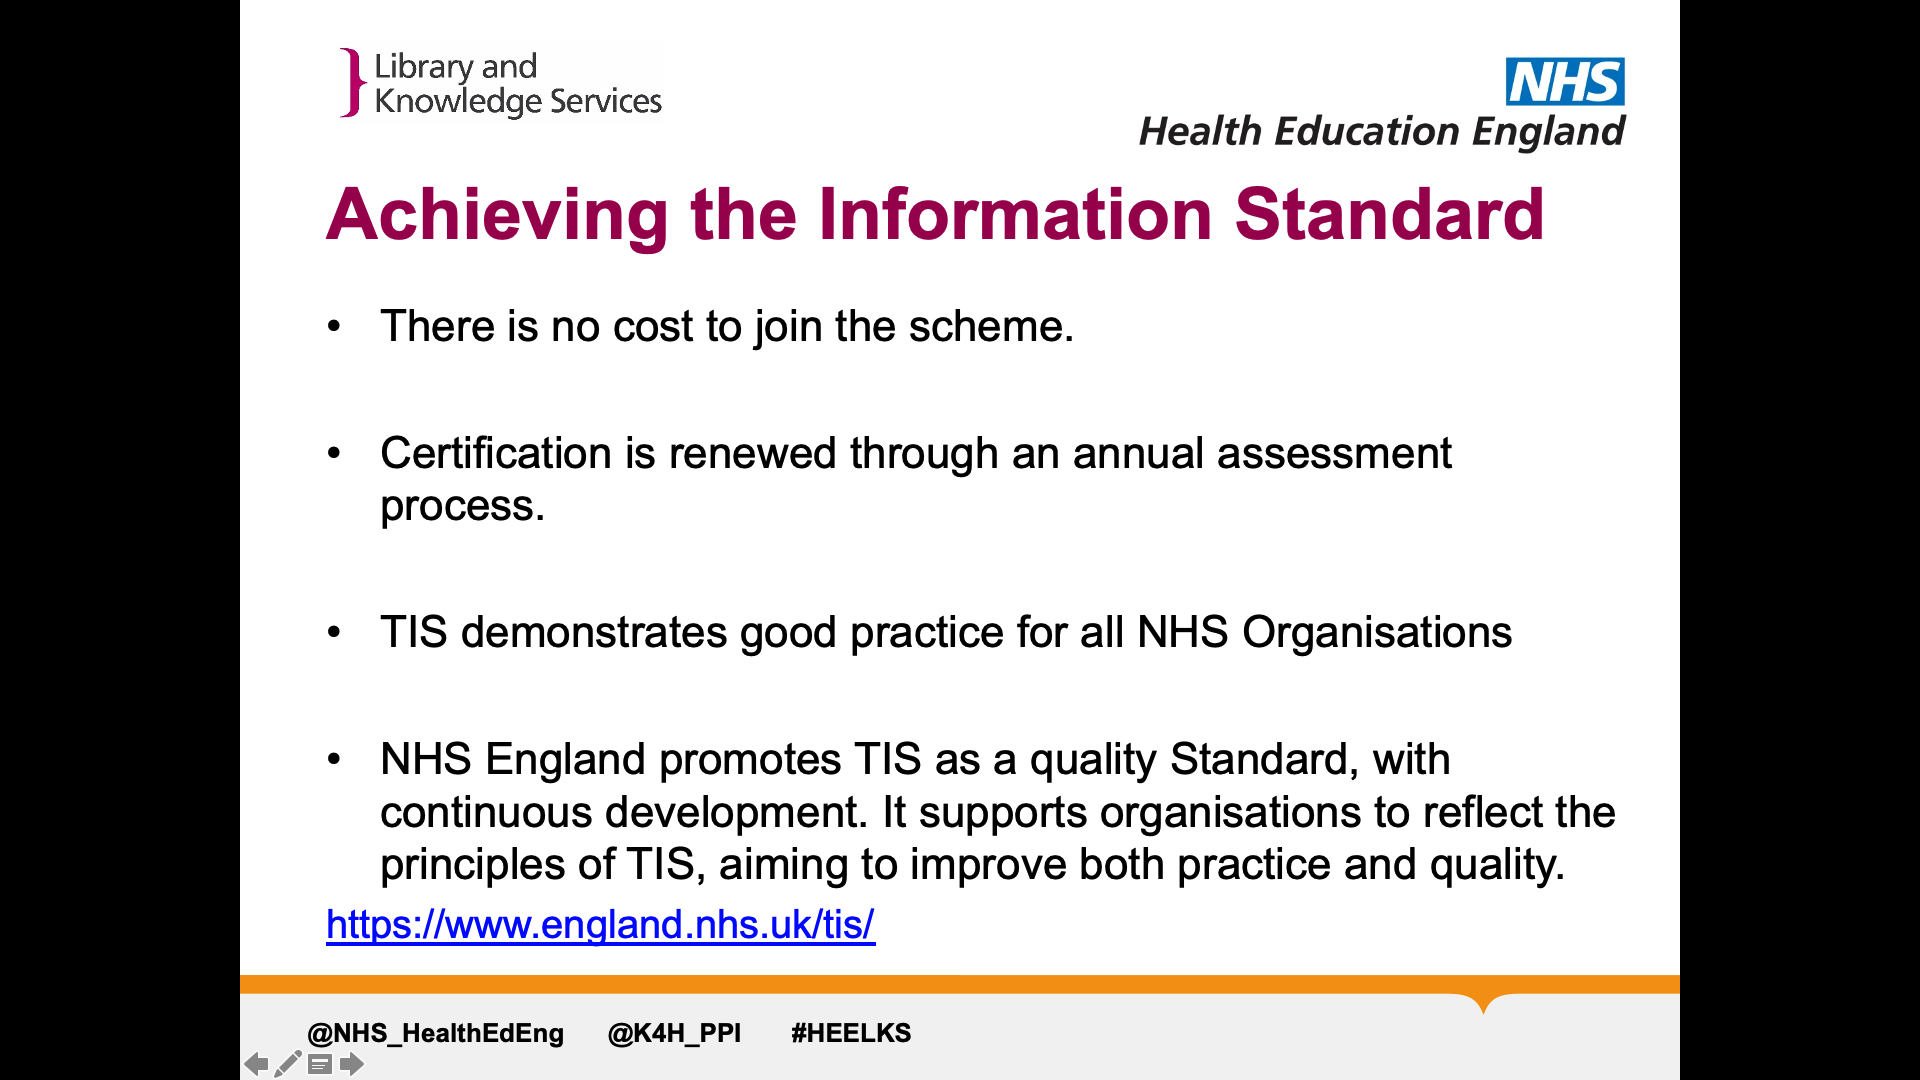 Title: Achieving the information standard. Text on page: There is no cost to join the scheme.  Certification is renewed through an annual assessment process.  TIS demonstrates good practice for all NHS Organisations  NHS England promotes TIS as a quality Standard, with continuous development. It supports organisations to reflect the principles of TIS, aiming to improve both practice and quality. https://www.england.nhs.uk/tis/